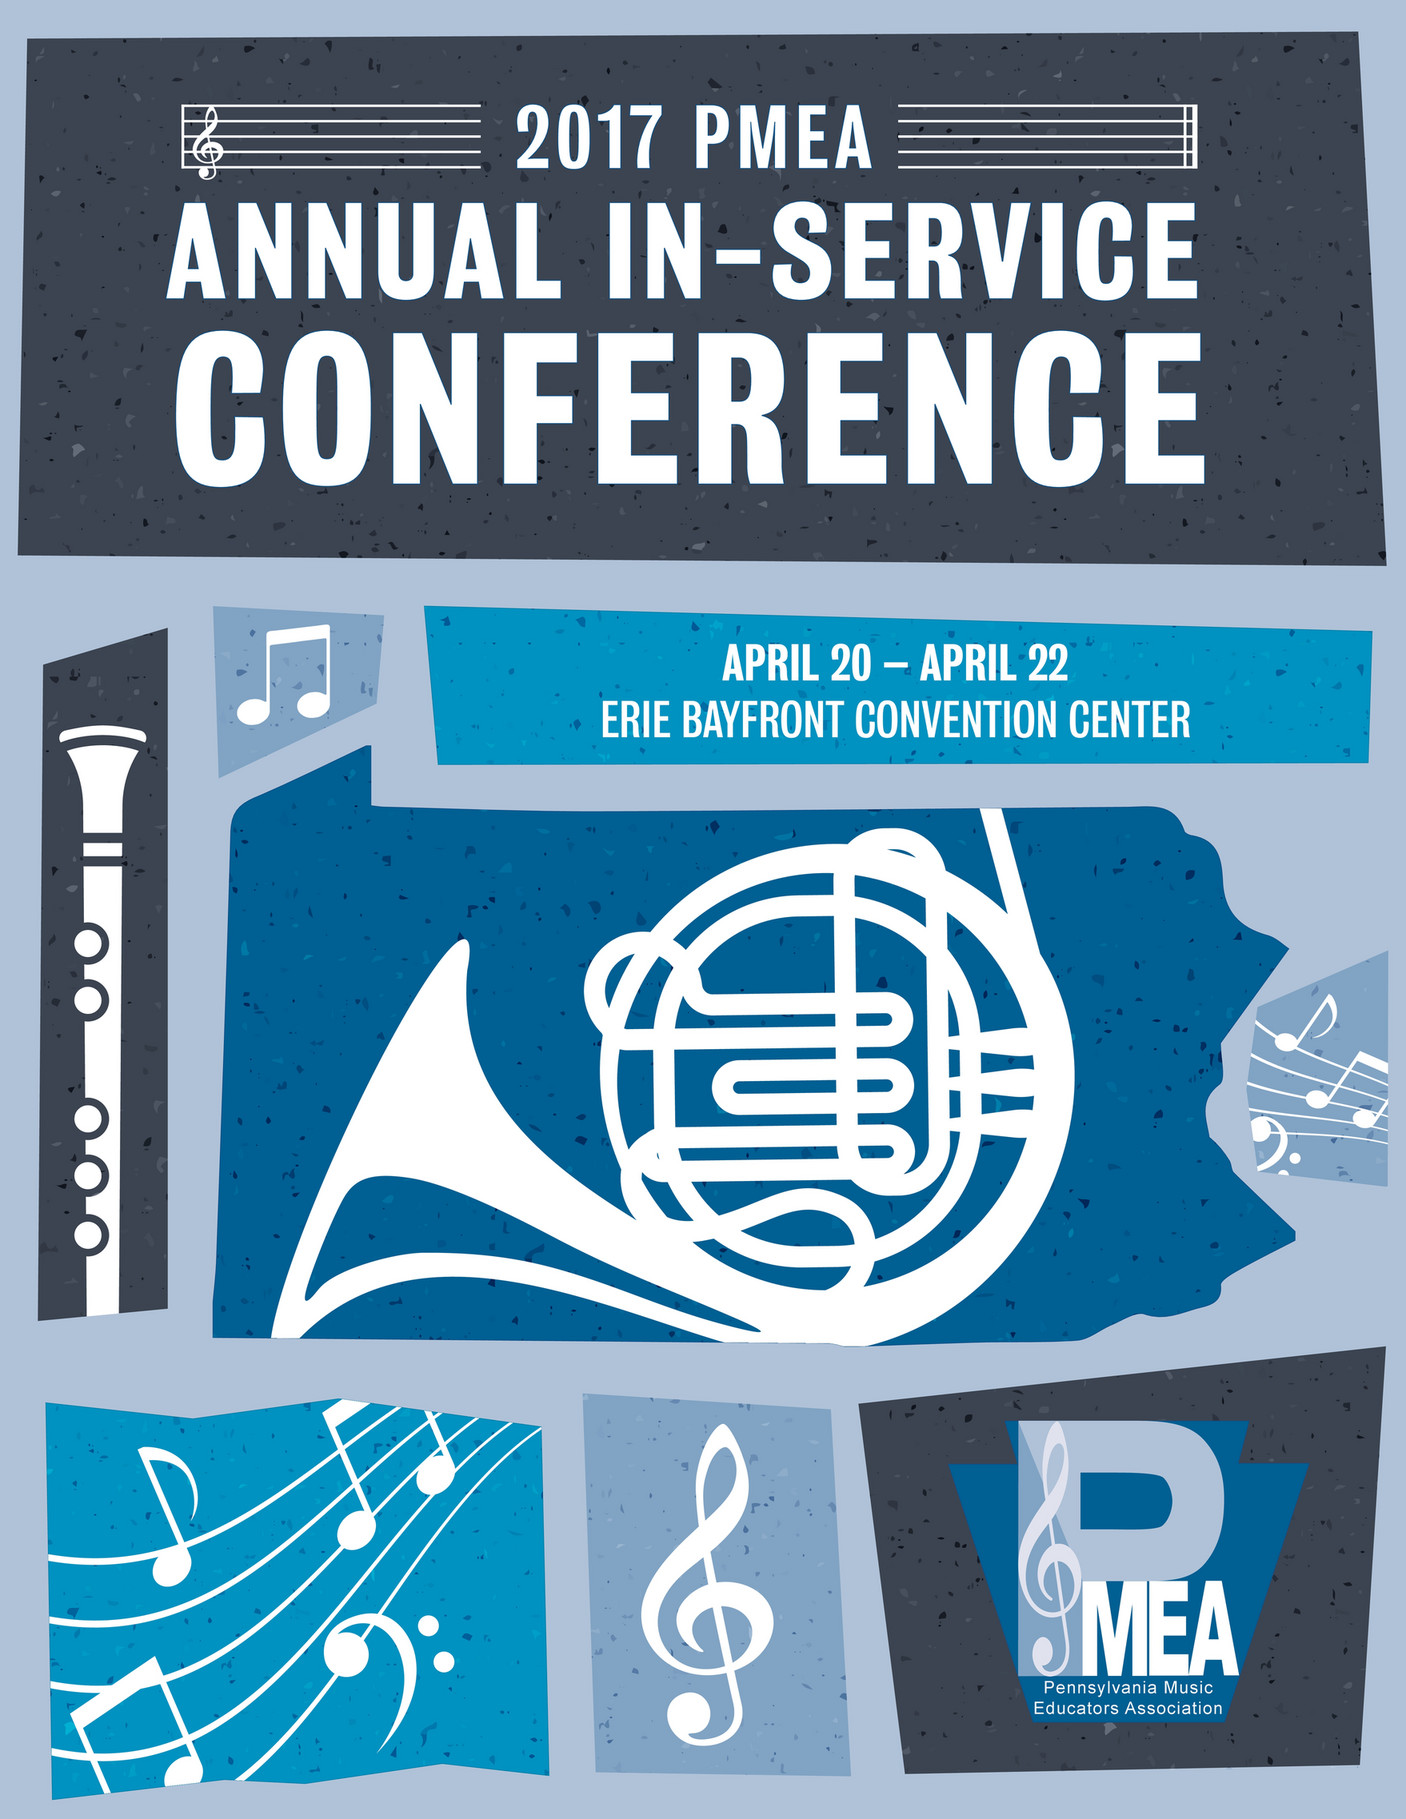 PMEA PMEA News Conference Insert Page 1 Created with